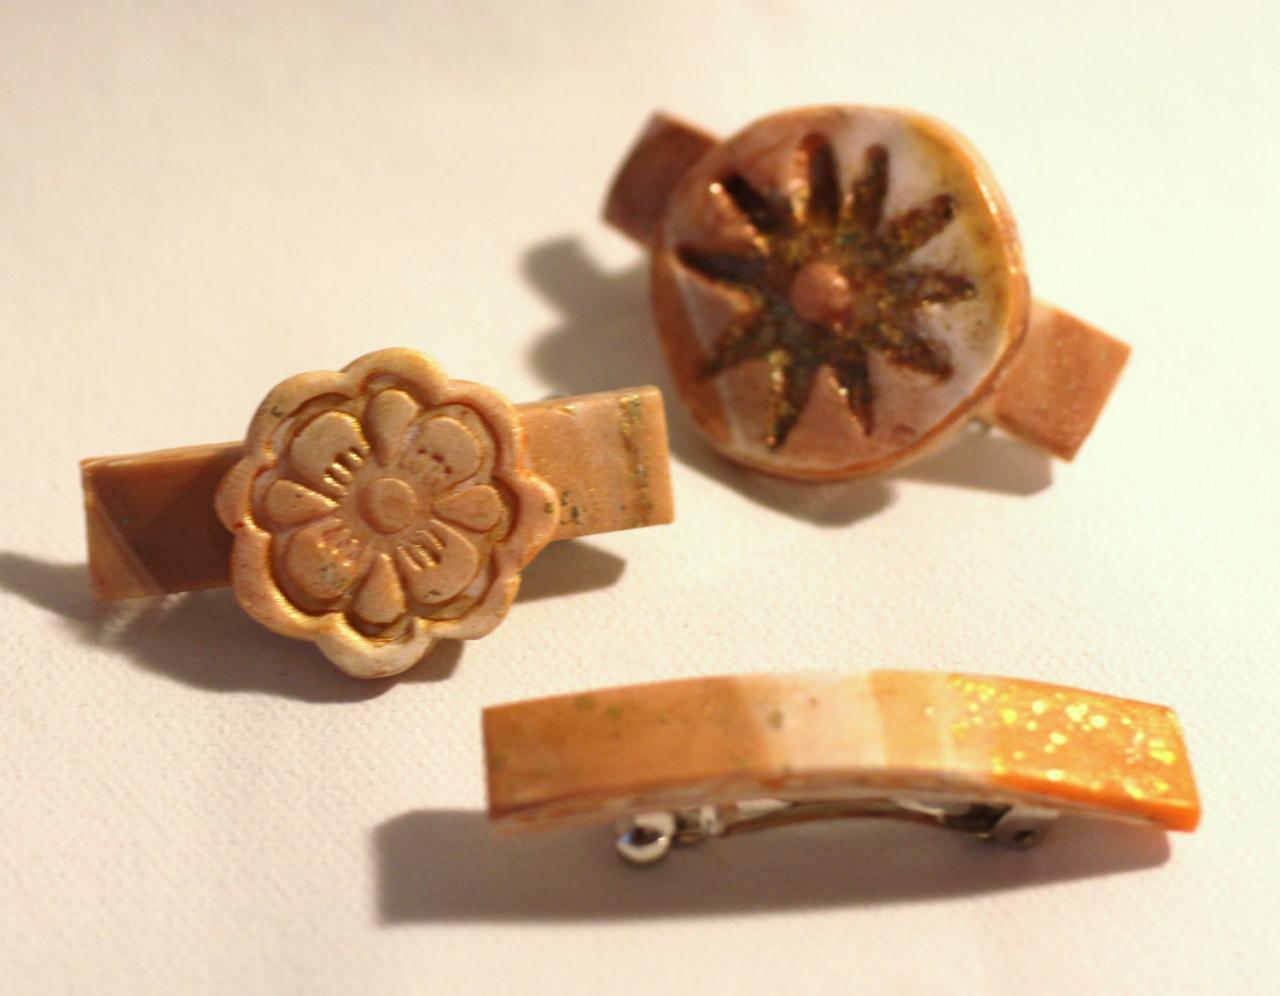 Womens Hair Clips, Bitsy Barrettes, 3 Polymer Clay Barrettes, Sun-Kissed with Shimmery Gold Wash, Beach colors